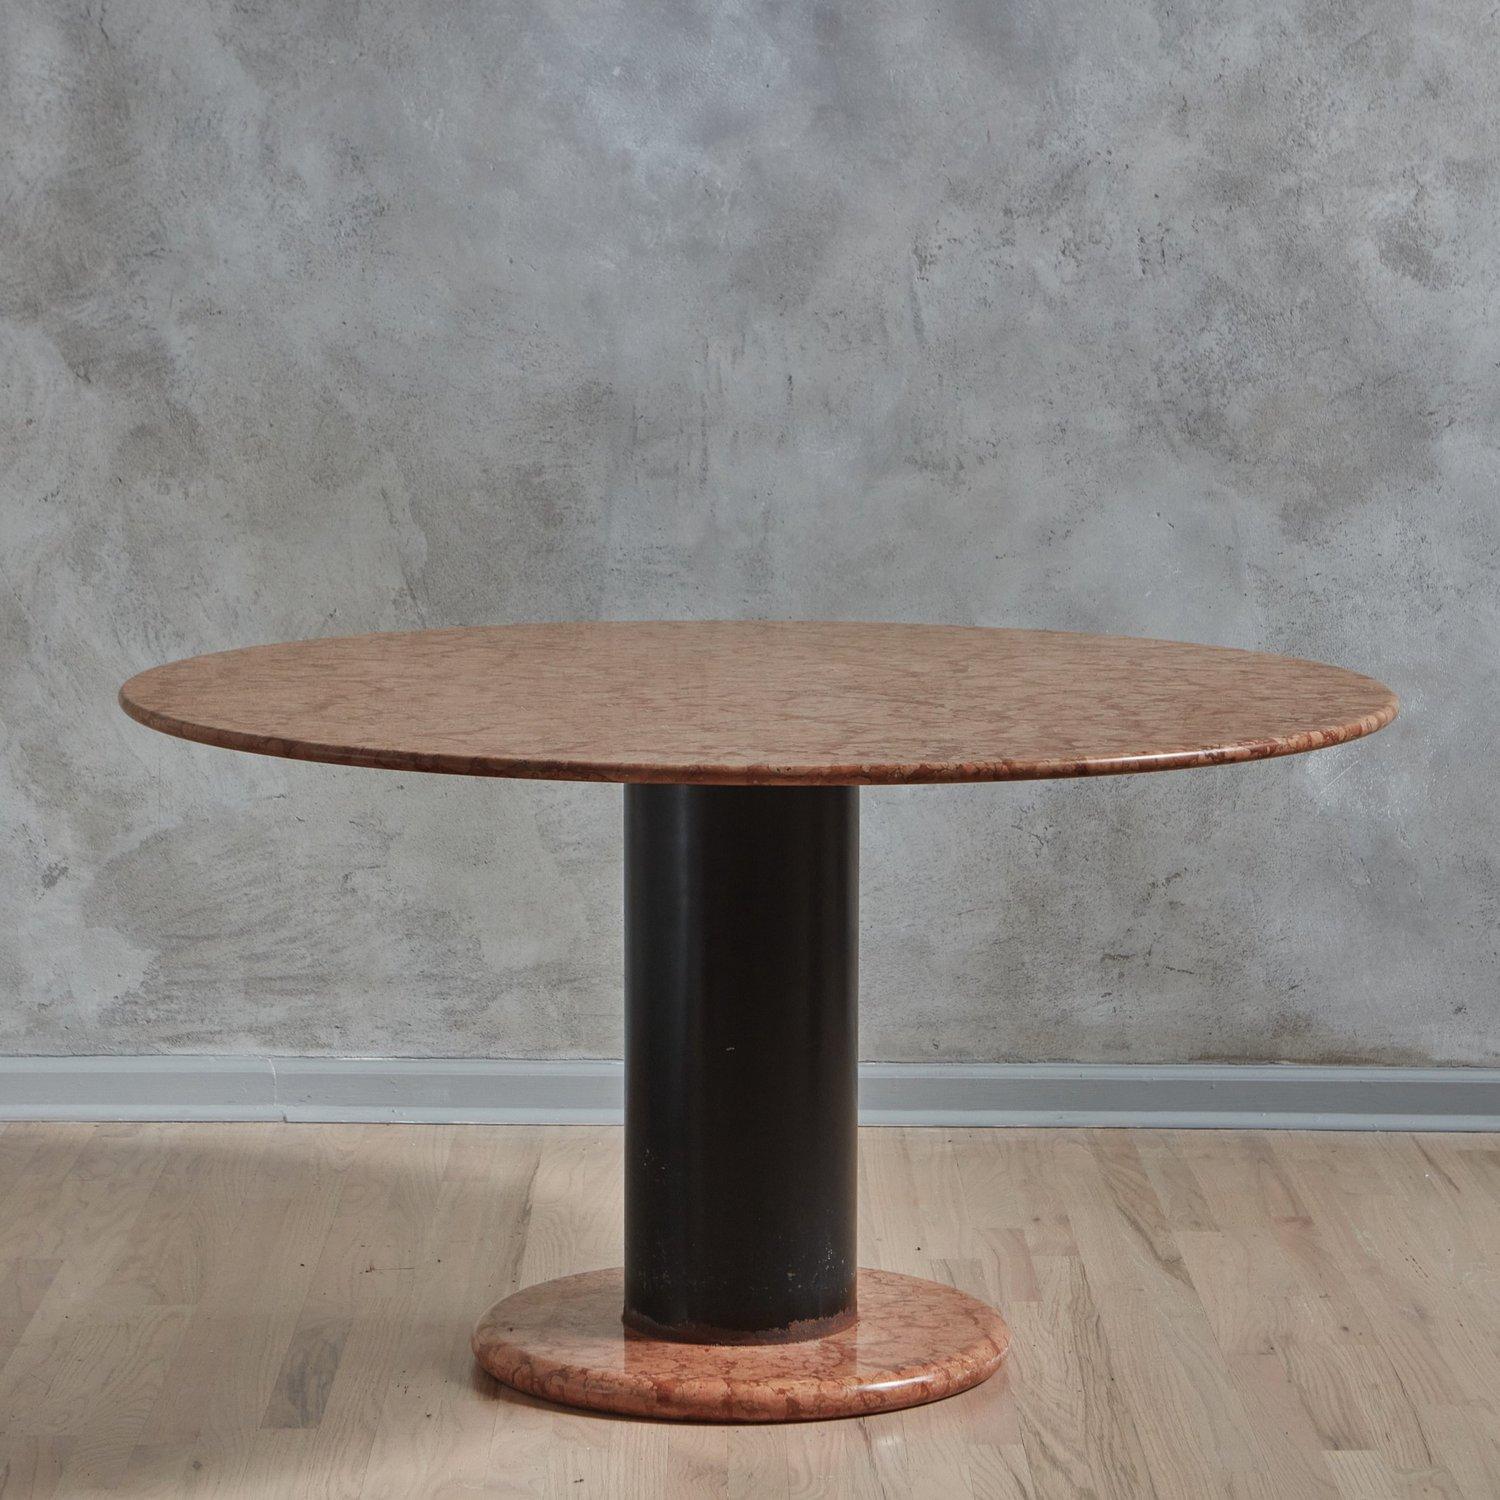 A Mid Century Italian dining table attributed to Ettore Sottsass for Poltronova, 1965. This table features a circular Lotto Rosso marble tabletop with a beveled edge and gorgeous coral and salmon veining. It has a matching circular base and a